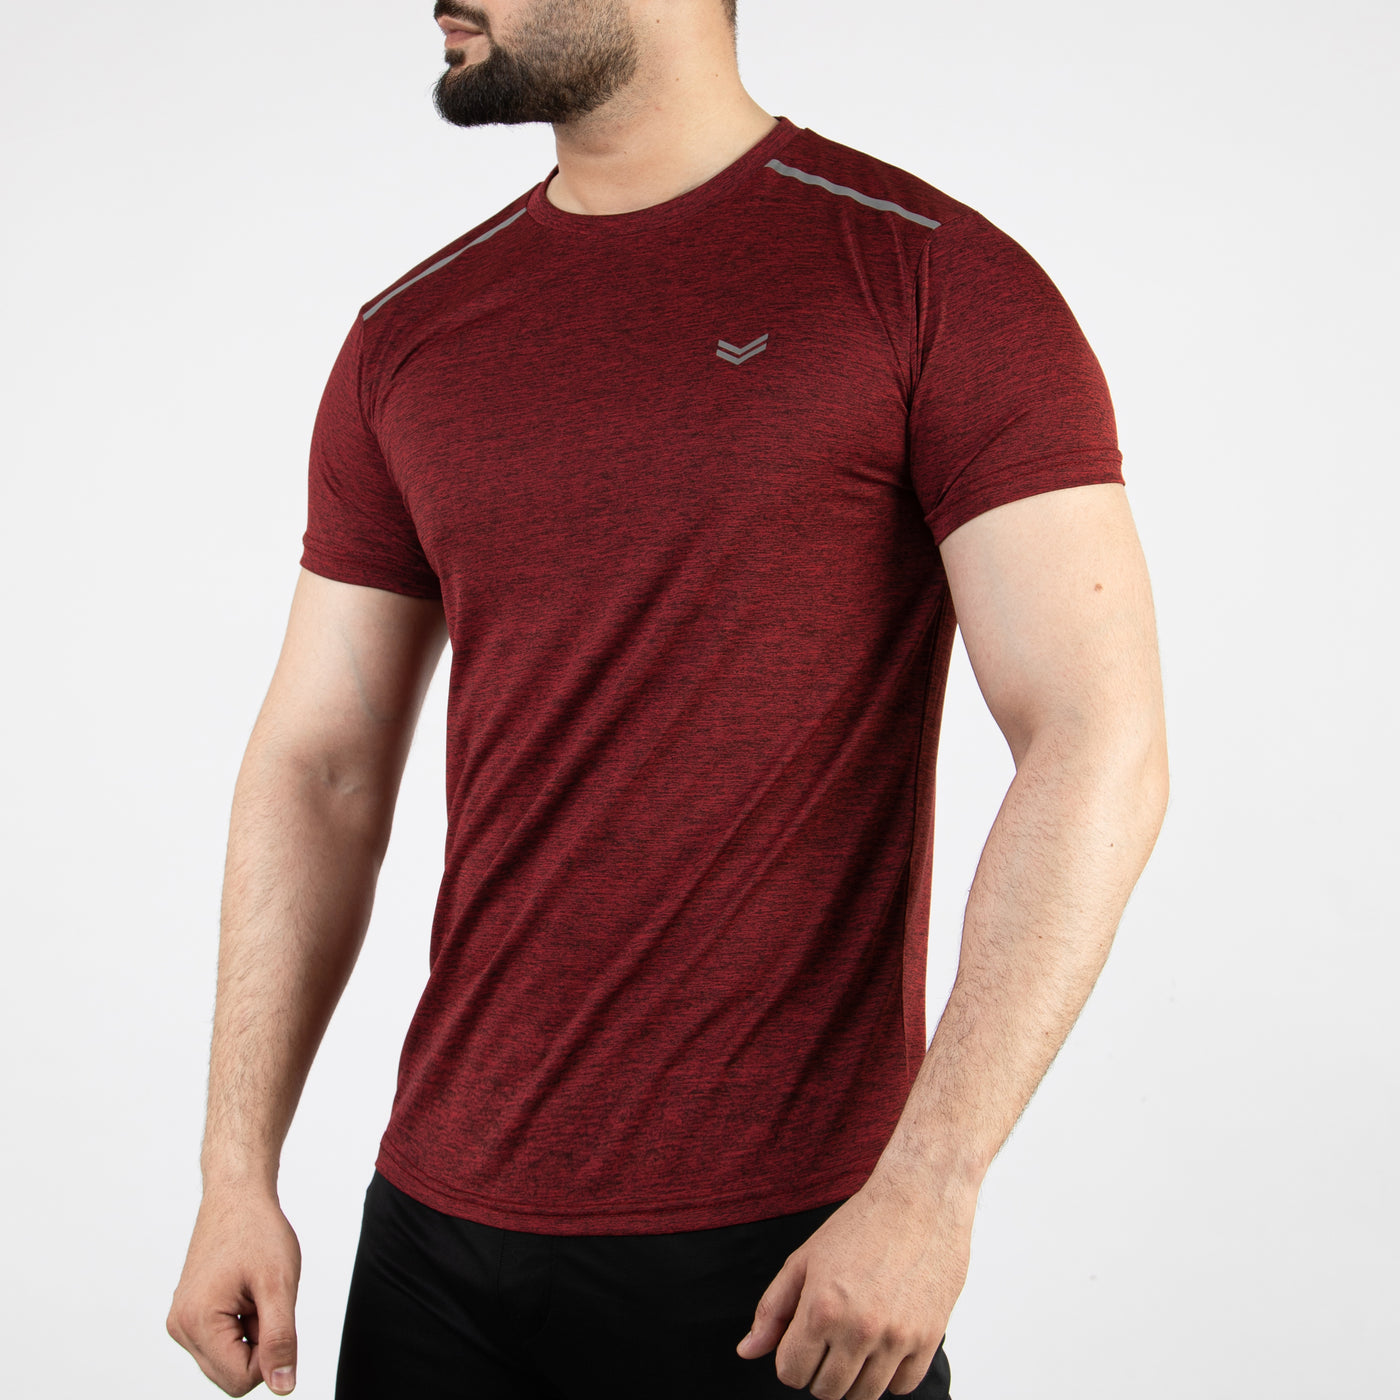 Textured Maroon Quick Dry T-Shirt with Shoulder Reflectors